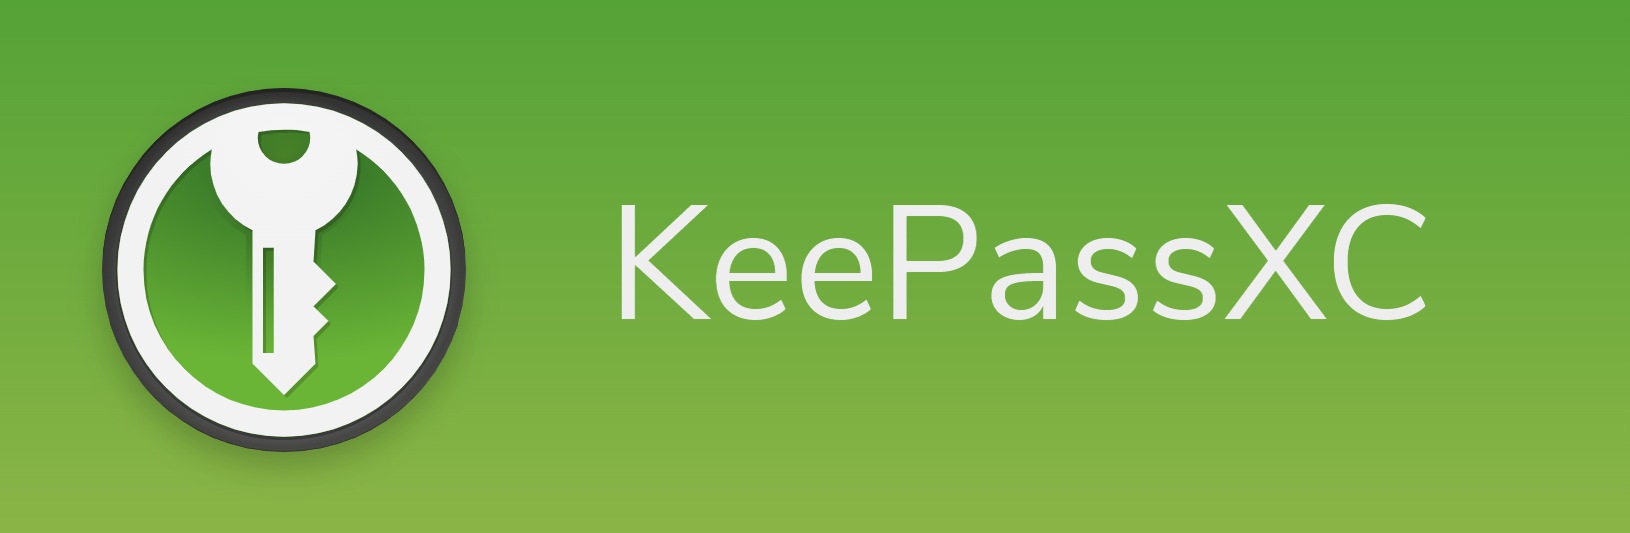 KeePassXC - Best free password manager for easy offline use